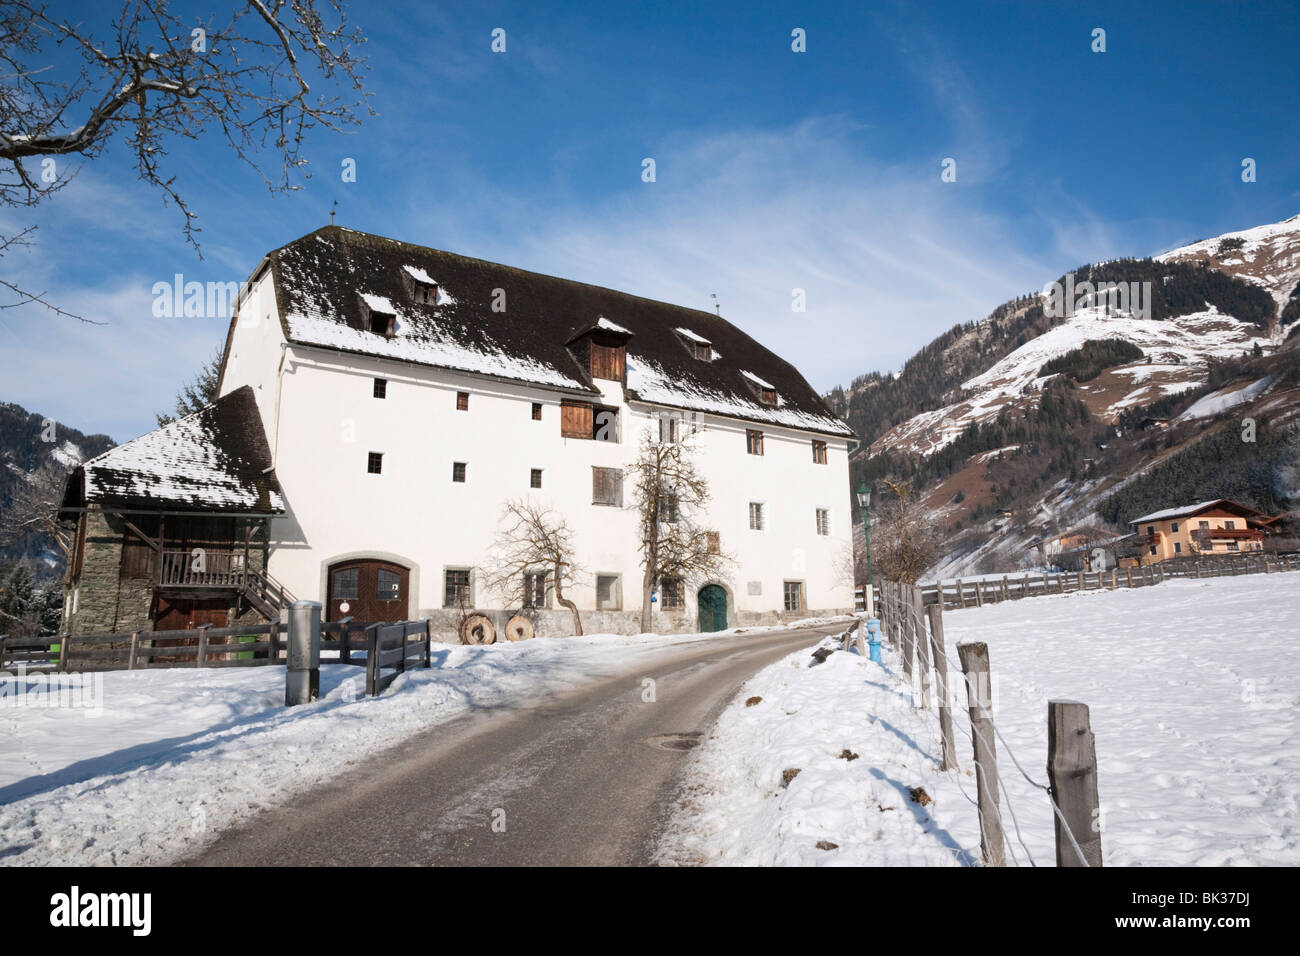 A 16th century historic building Furstenmuhle former bakery and mill dating from 1565, Rauris, Austria, Europe Stock Photo